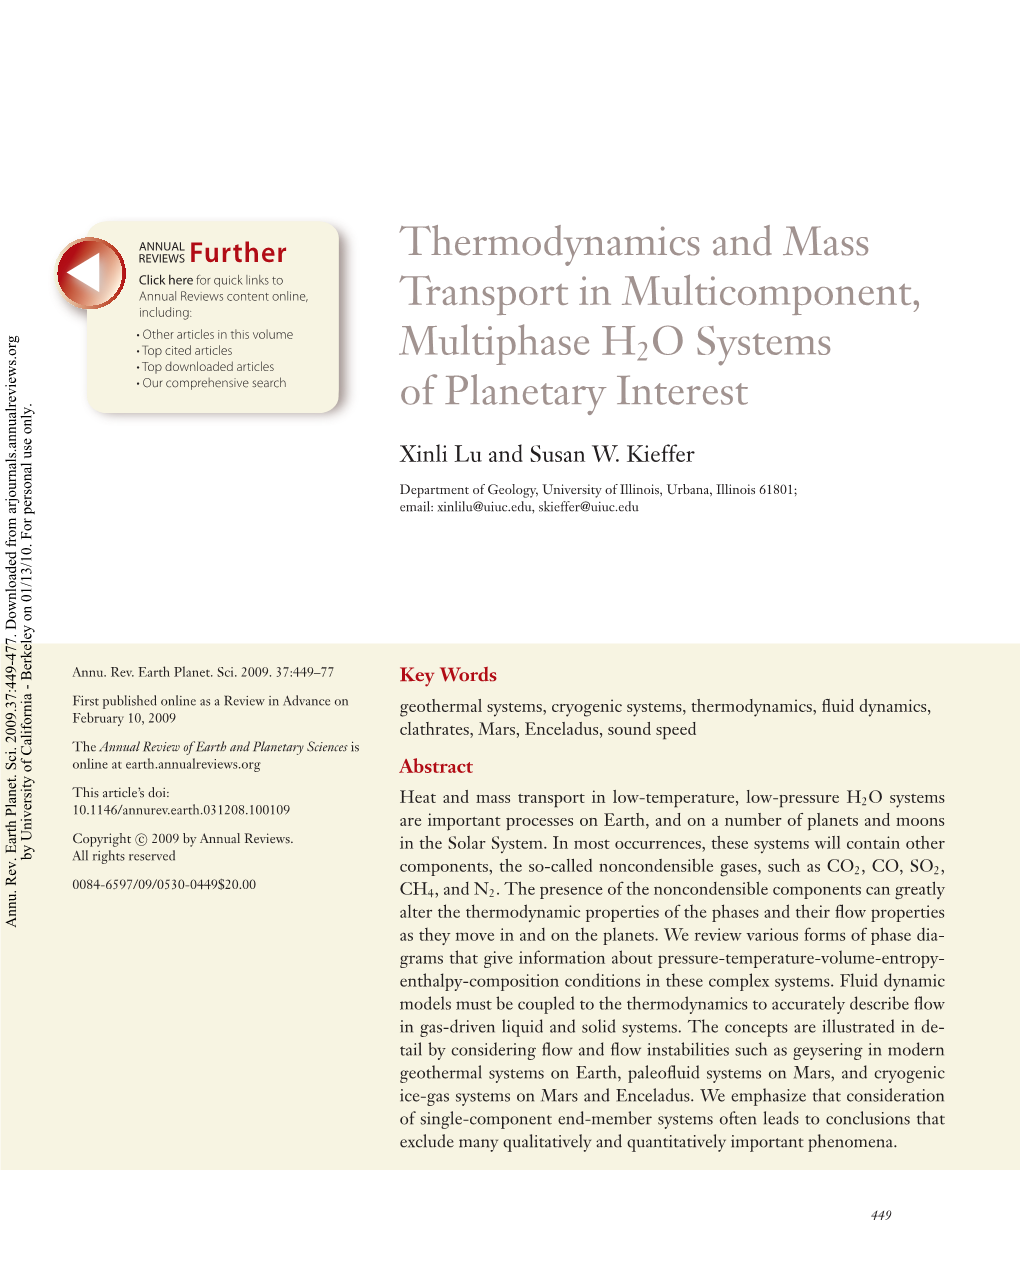 Thermodynamics and Mass Transport in Multicomponent, Multiphase H2O Systems of Planetary Interest